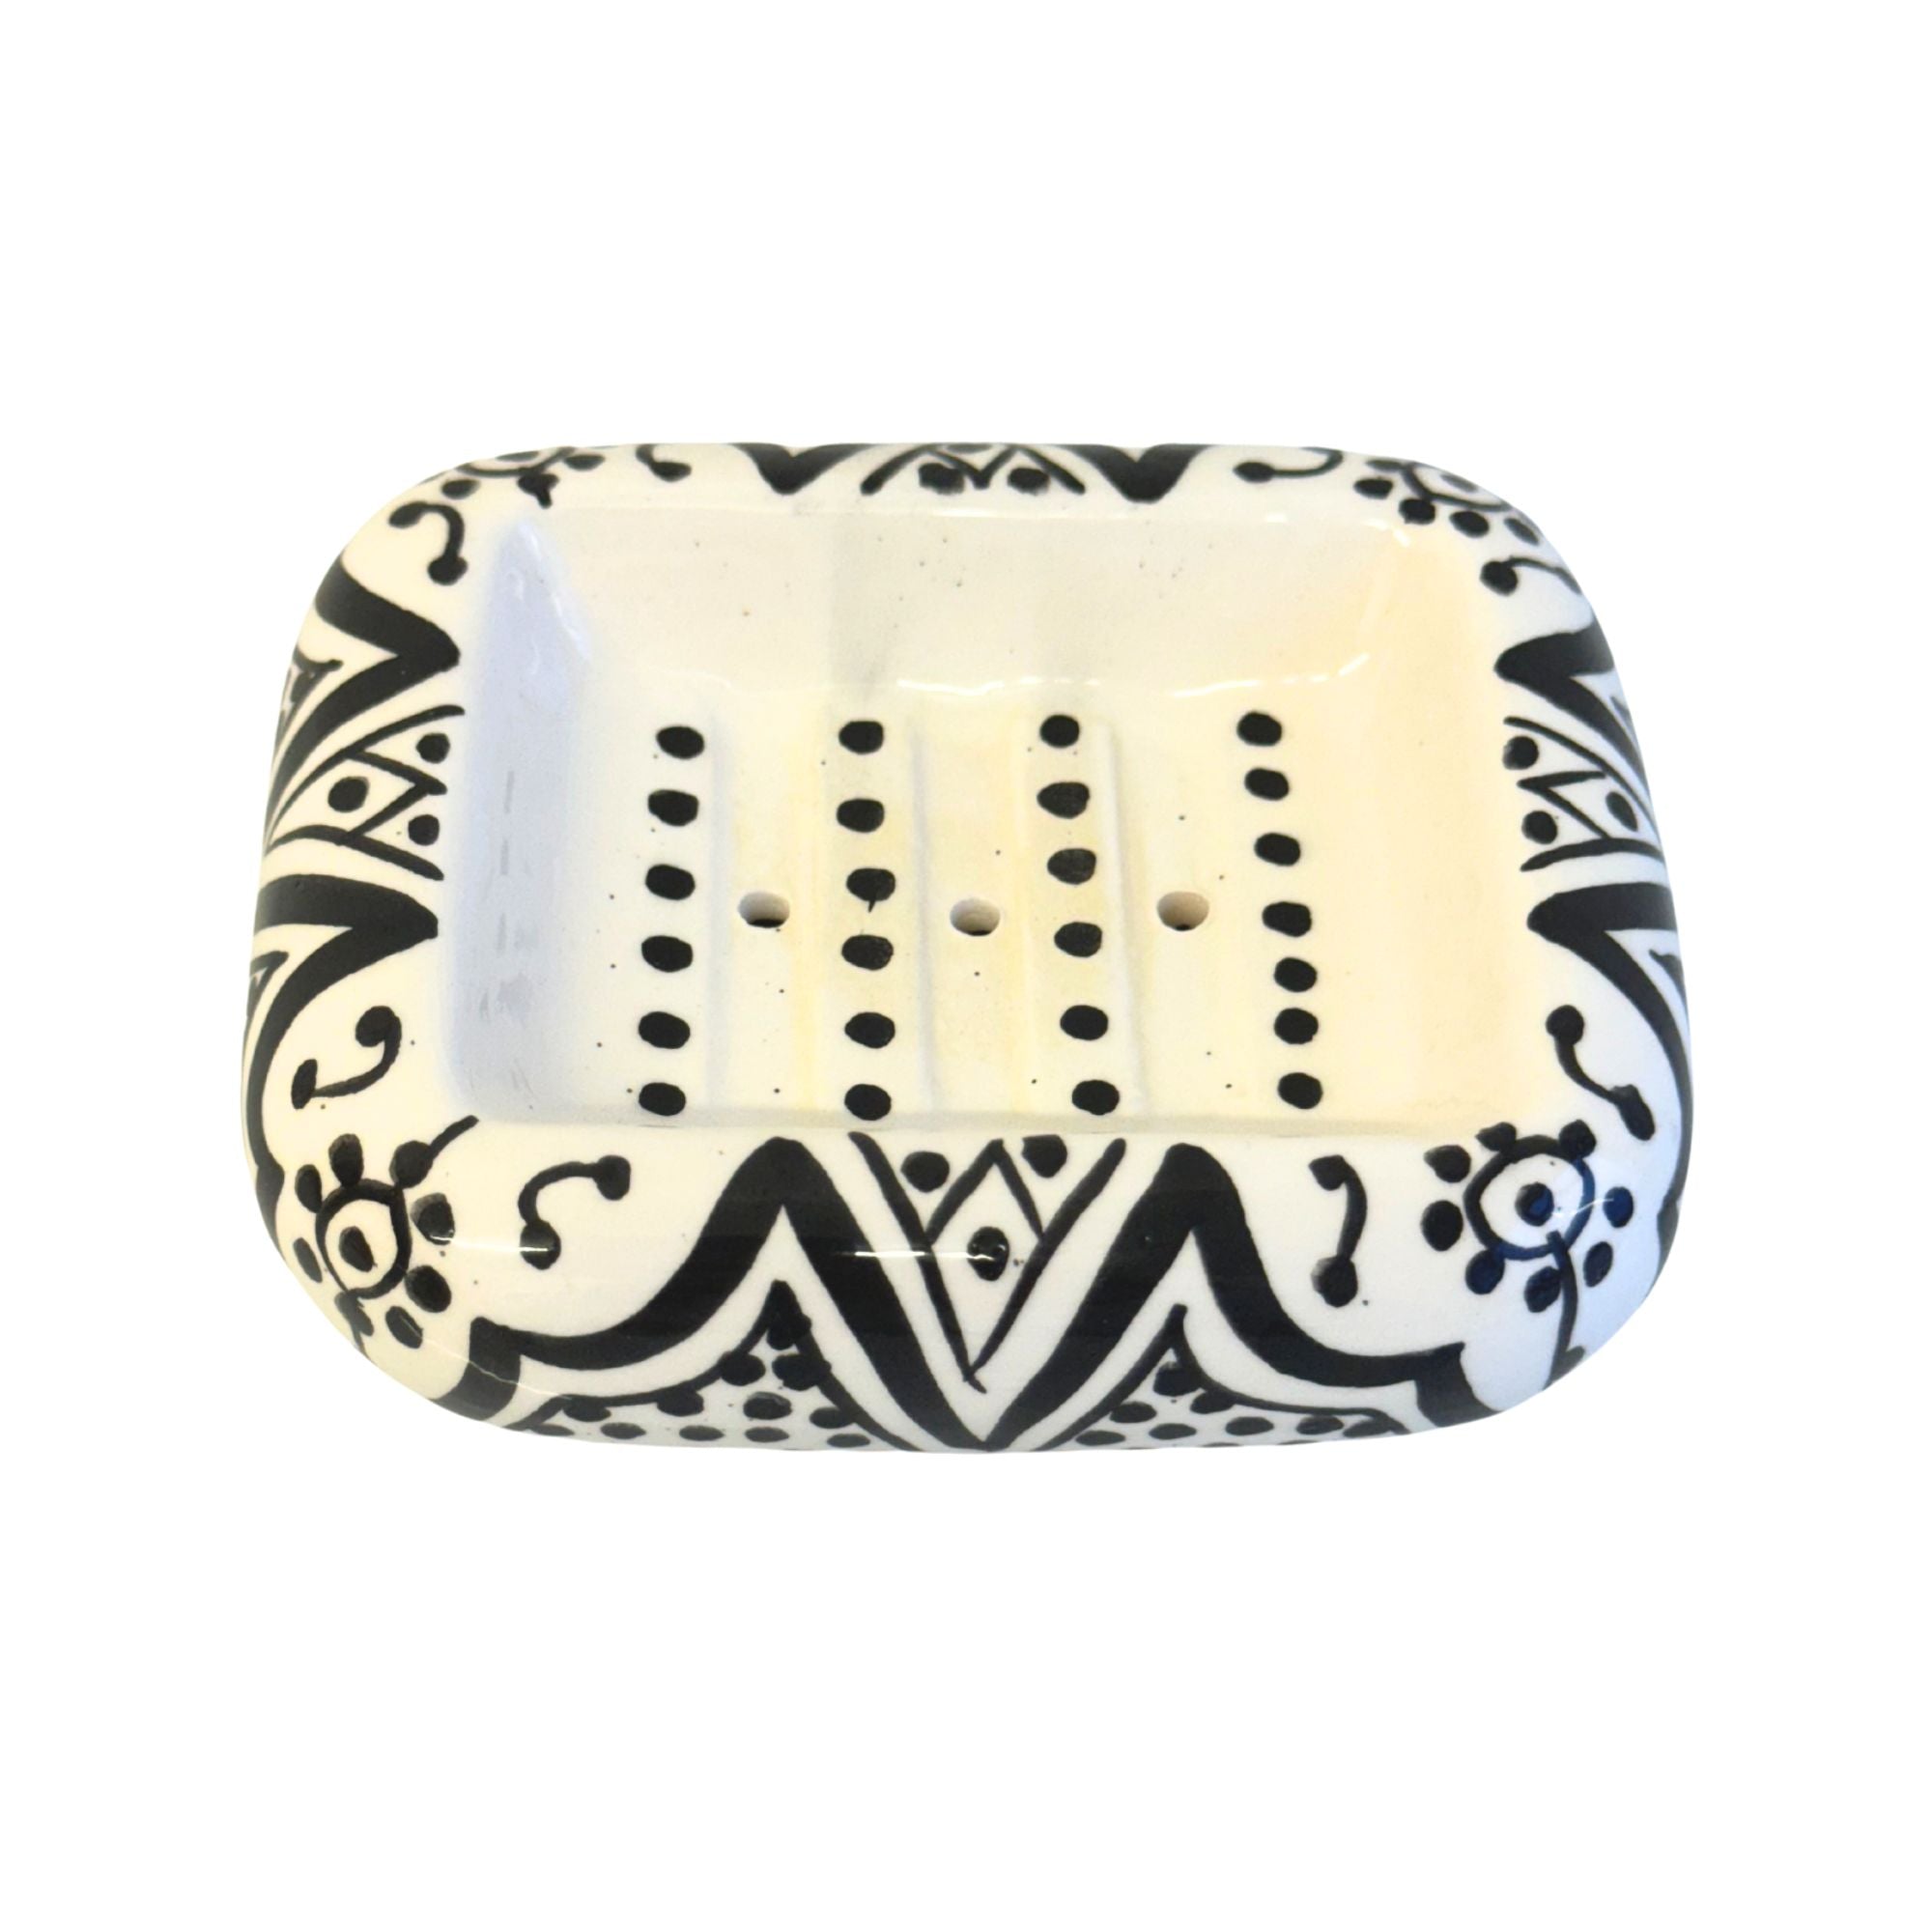 picture of handcrafted Moroccan ceramic soap dish with intricate Safa pattern